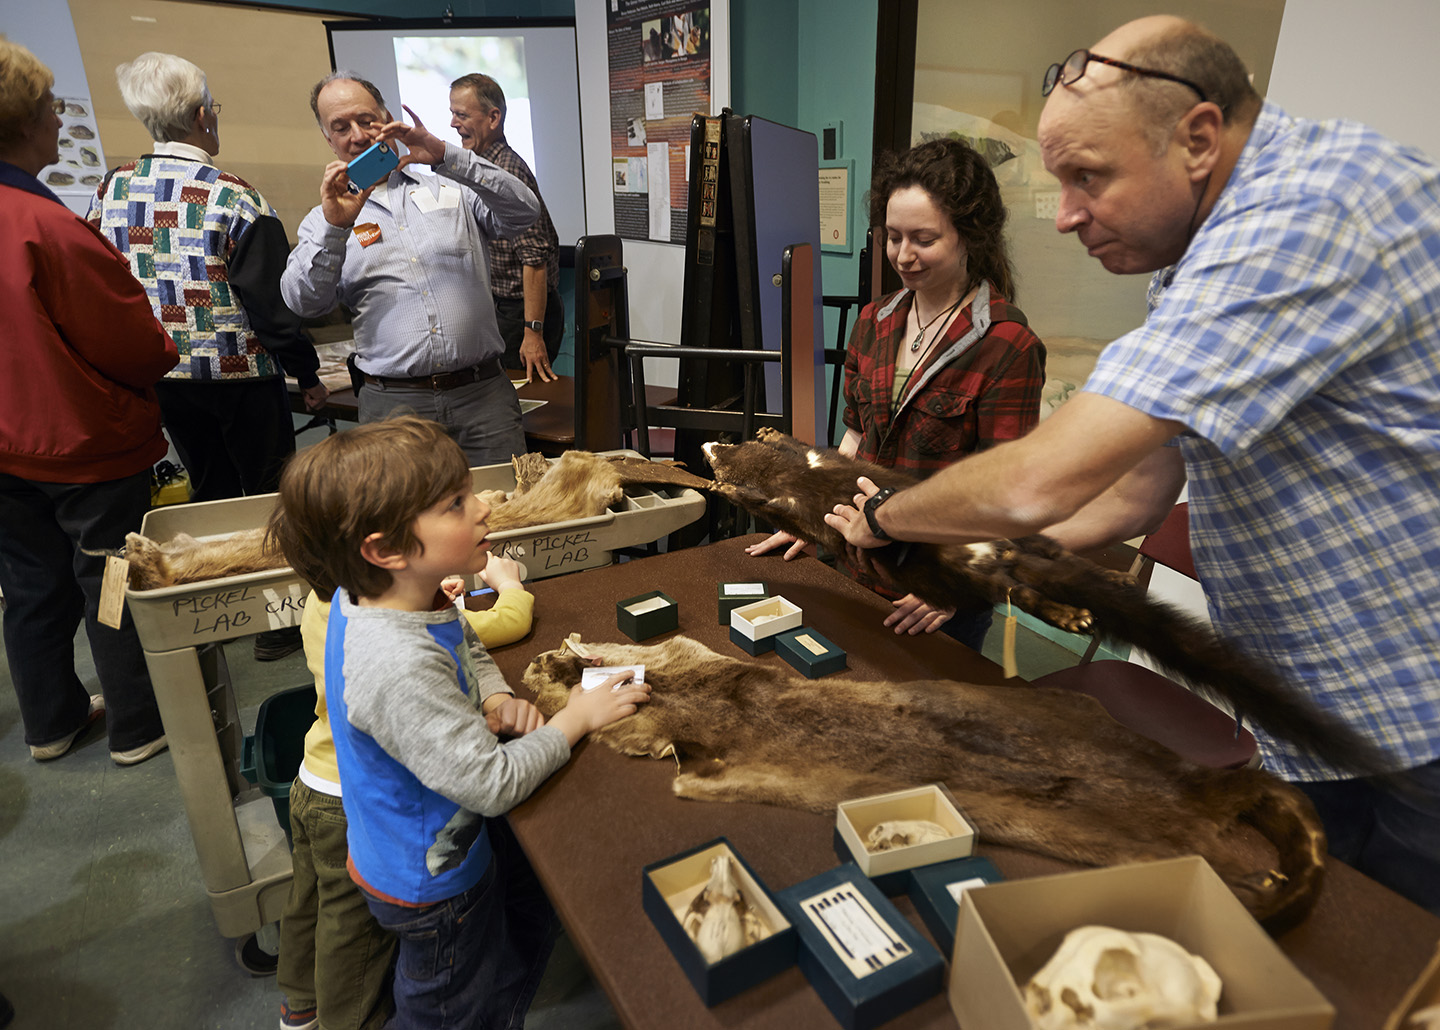 Bill left the dissection to others at Members’ Night 2014 (moved to the Sea Mammals exhibit). Field Museum photo by John Weinstein. GN91947_162d